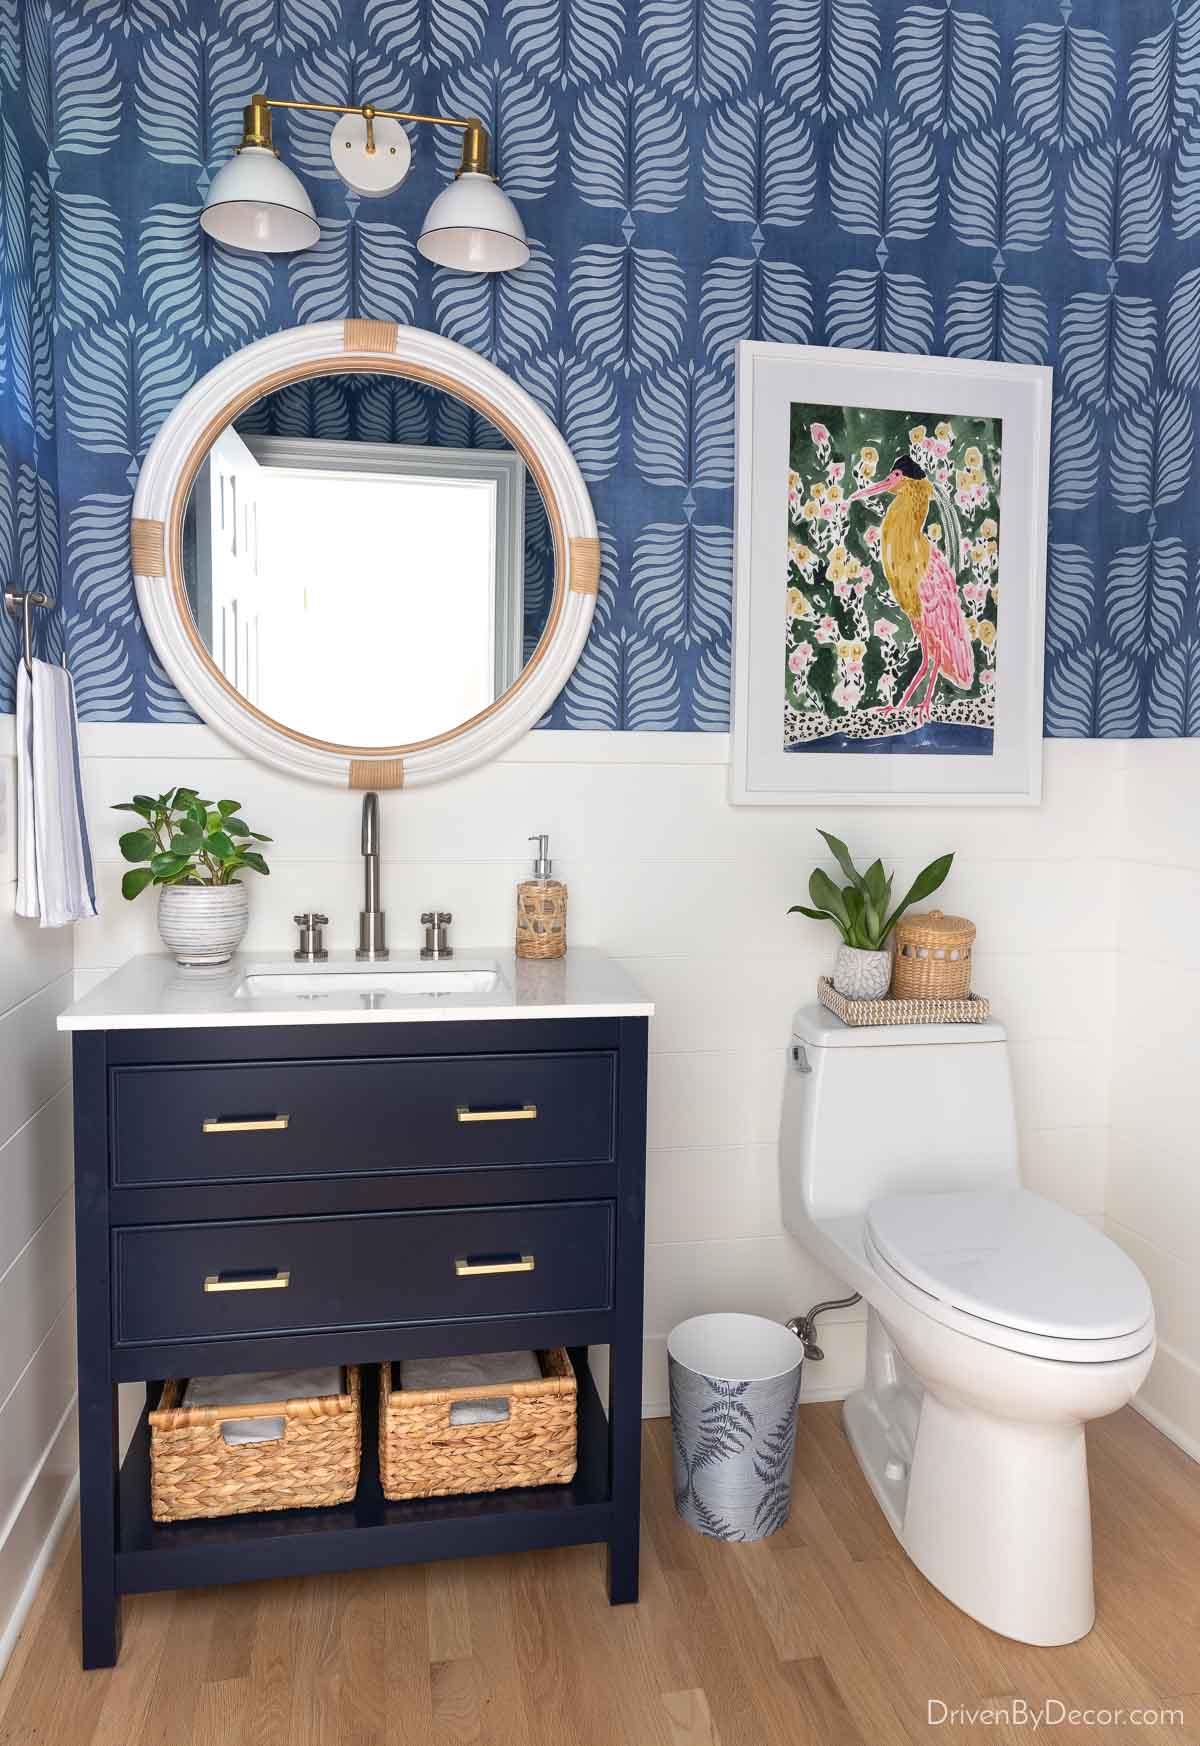 The small vanity we added to our powder room